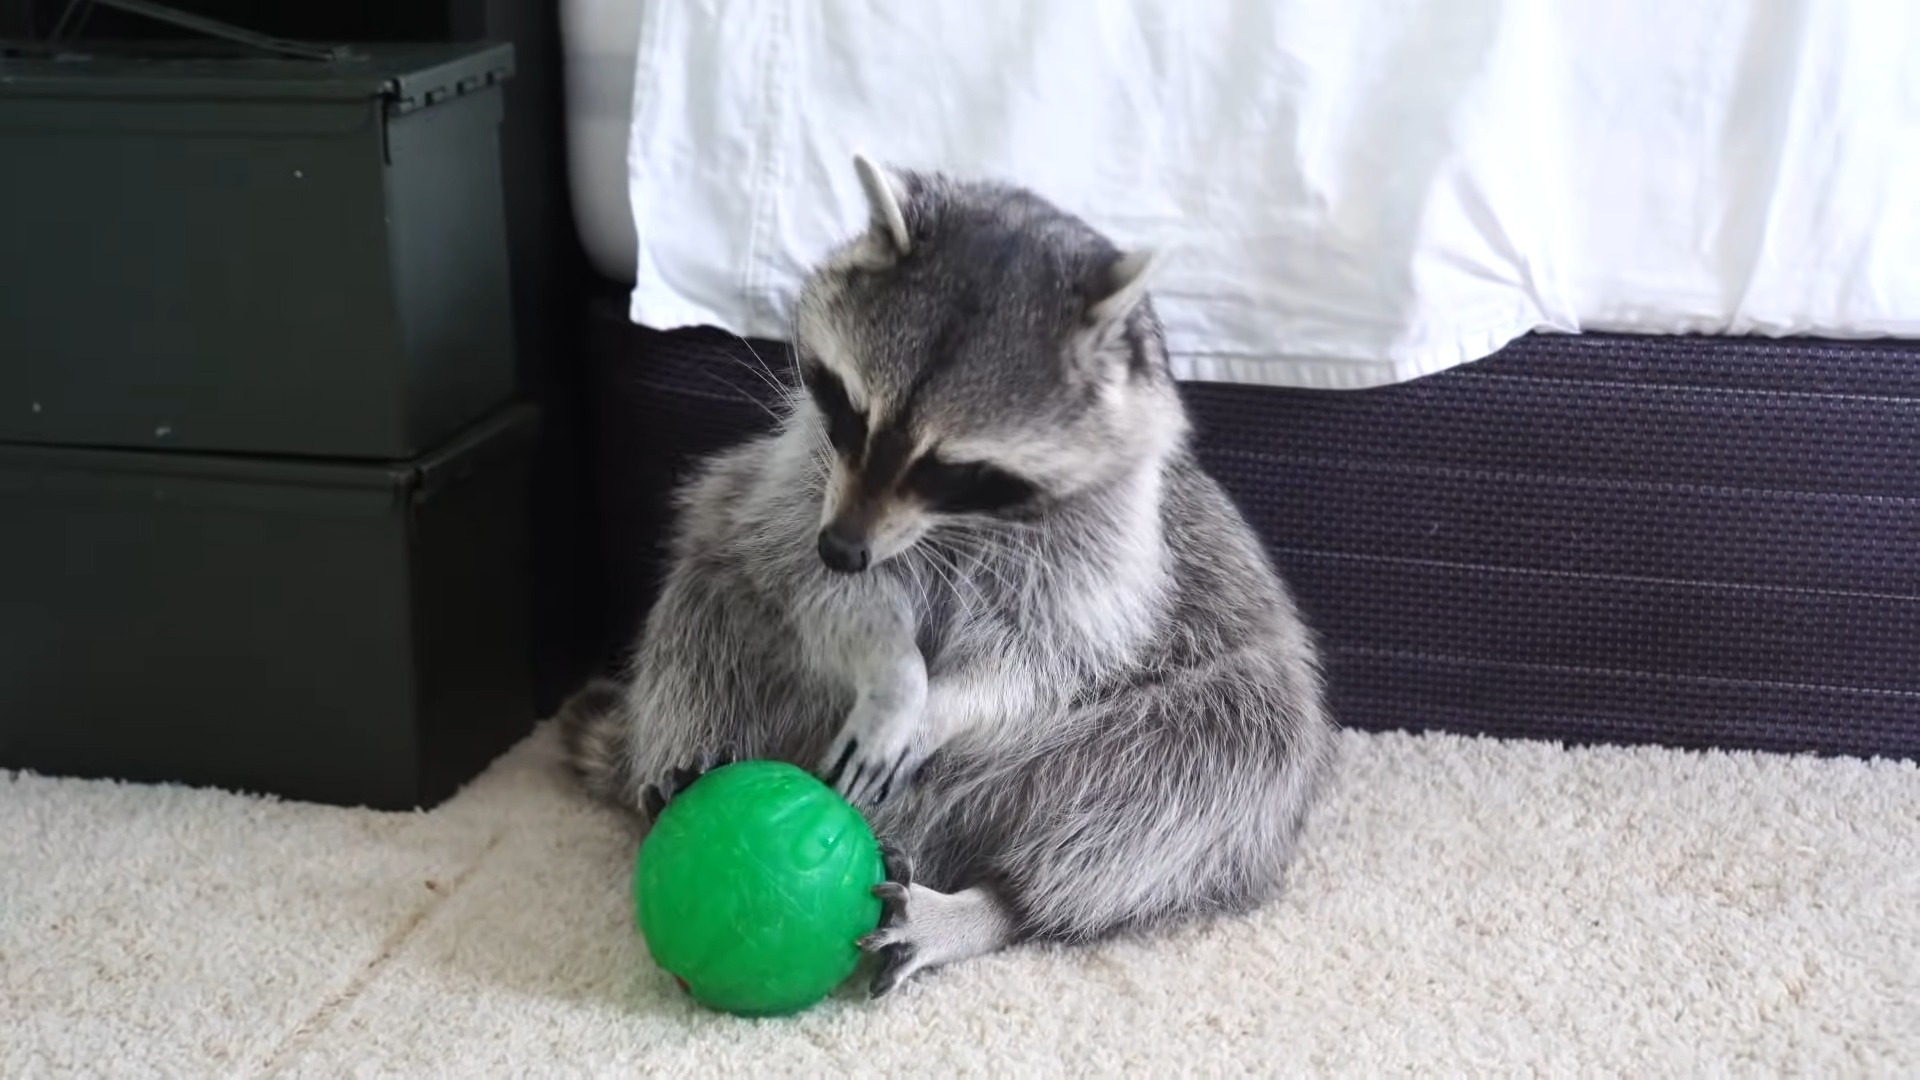 Raccoon playing with the ball